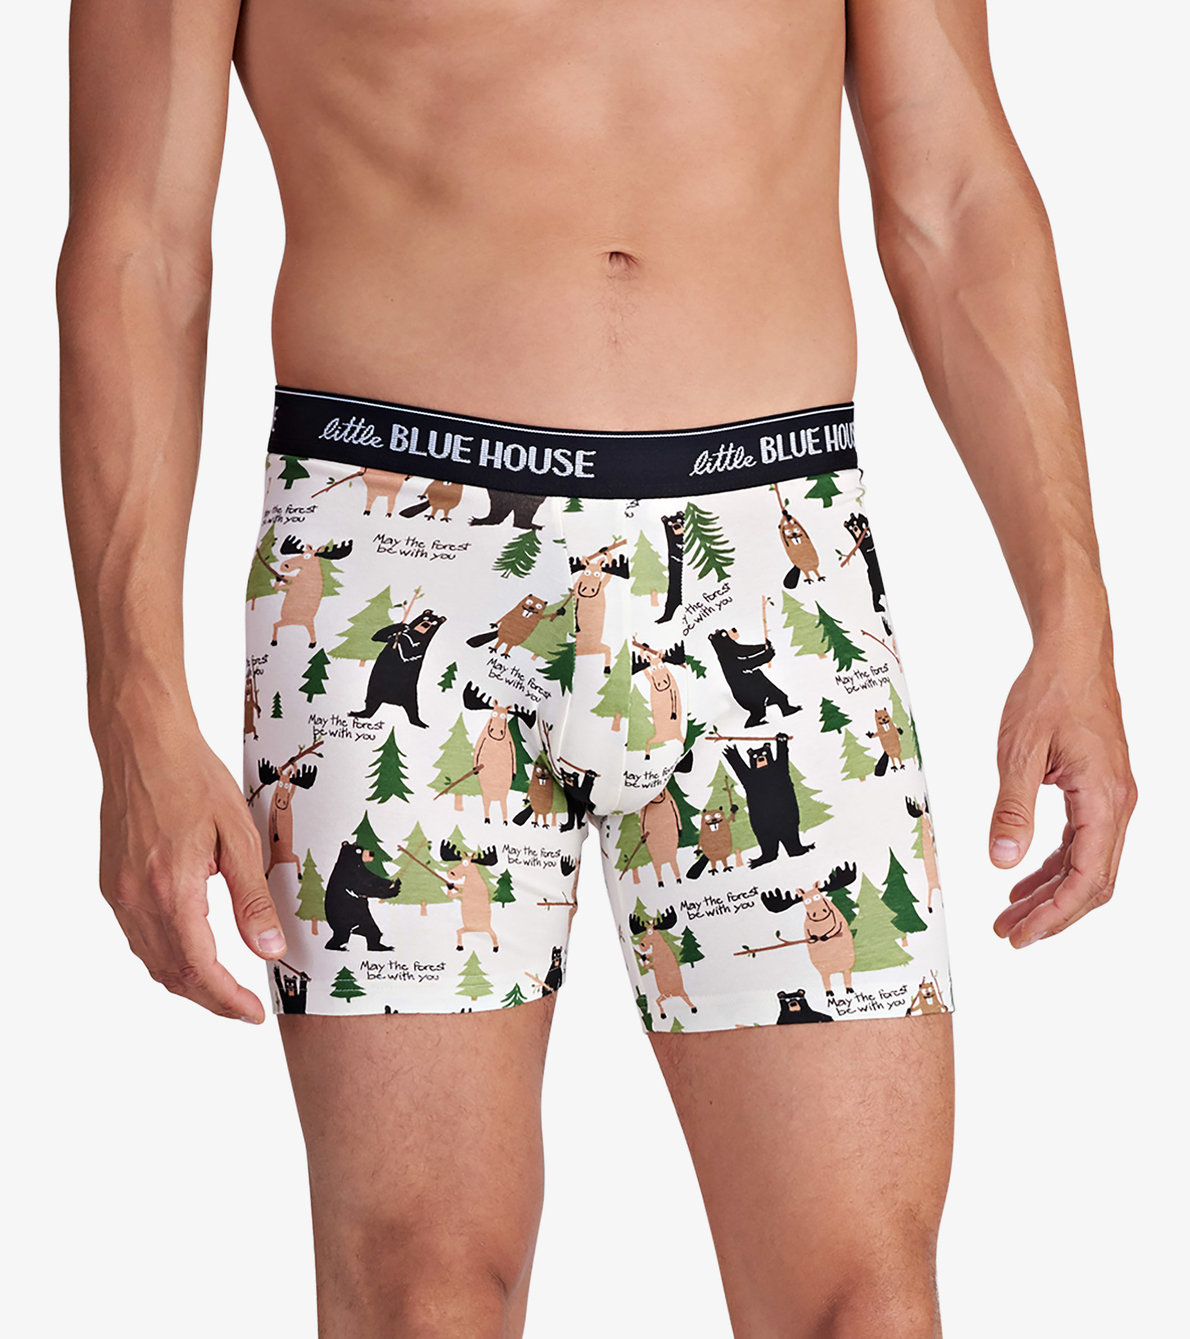 View larger image of May the Forest be With You Men's Boxer Briefs